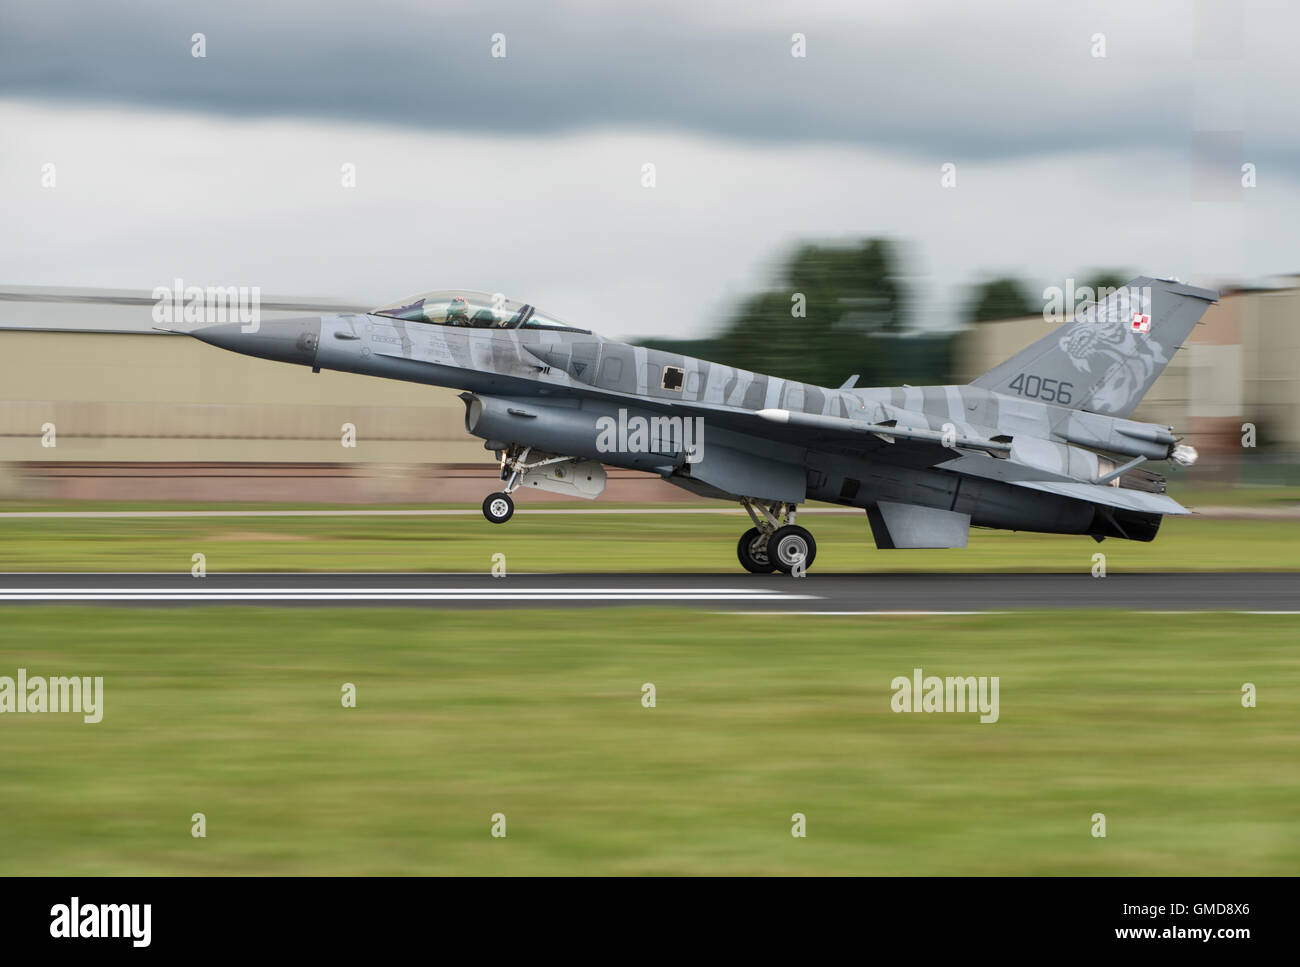 General Dynamic Lockheed Martin F-16C Fighting Falcon Military Jet Fighter 4056 of the Polish Air Force lands at the RIAT Stock Photo